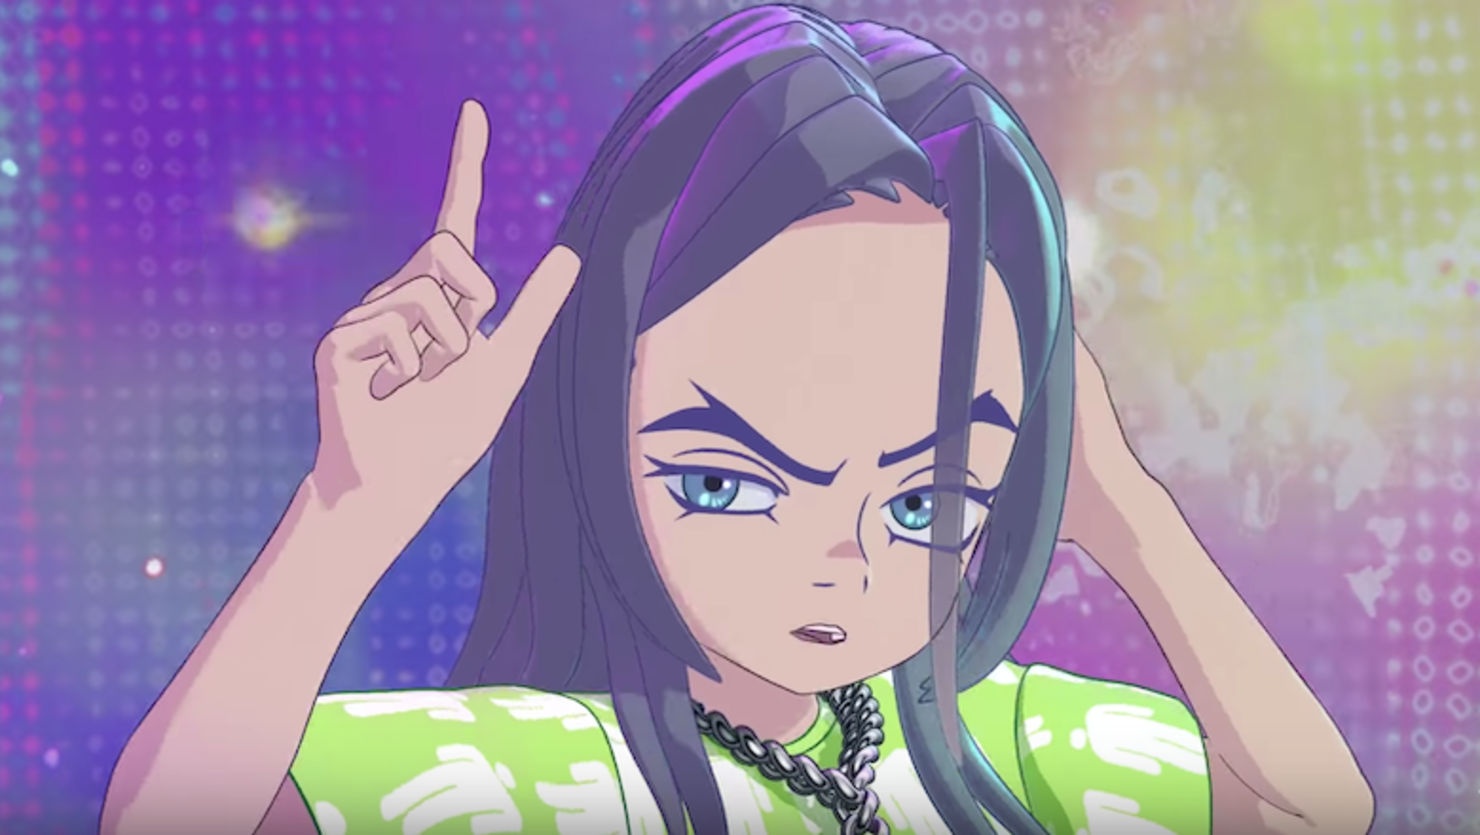 Billie Eilish 'you should see me in a crown' by Takashi Murakami, Videos